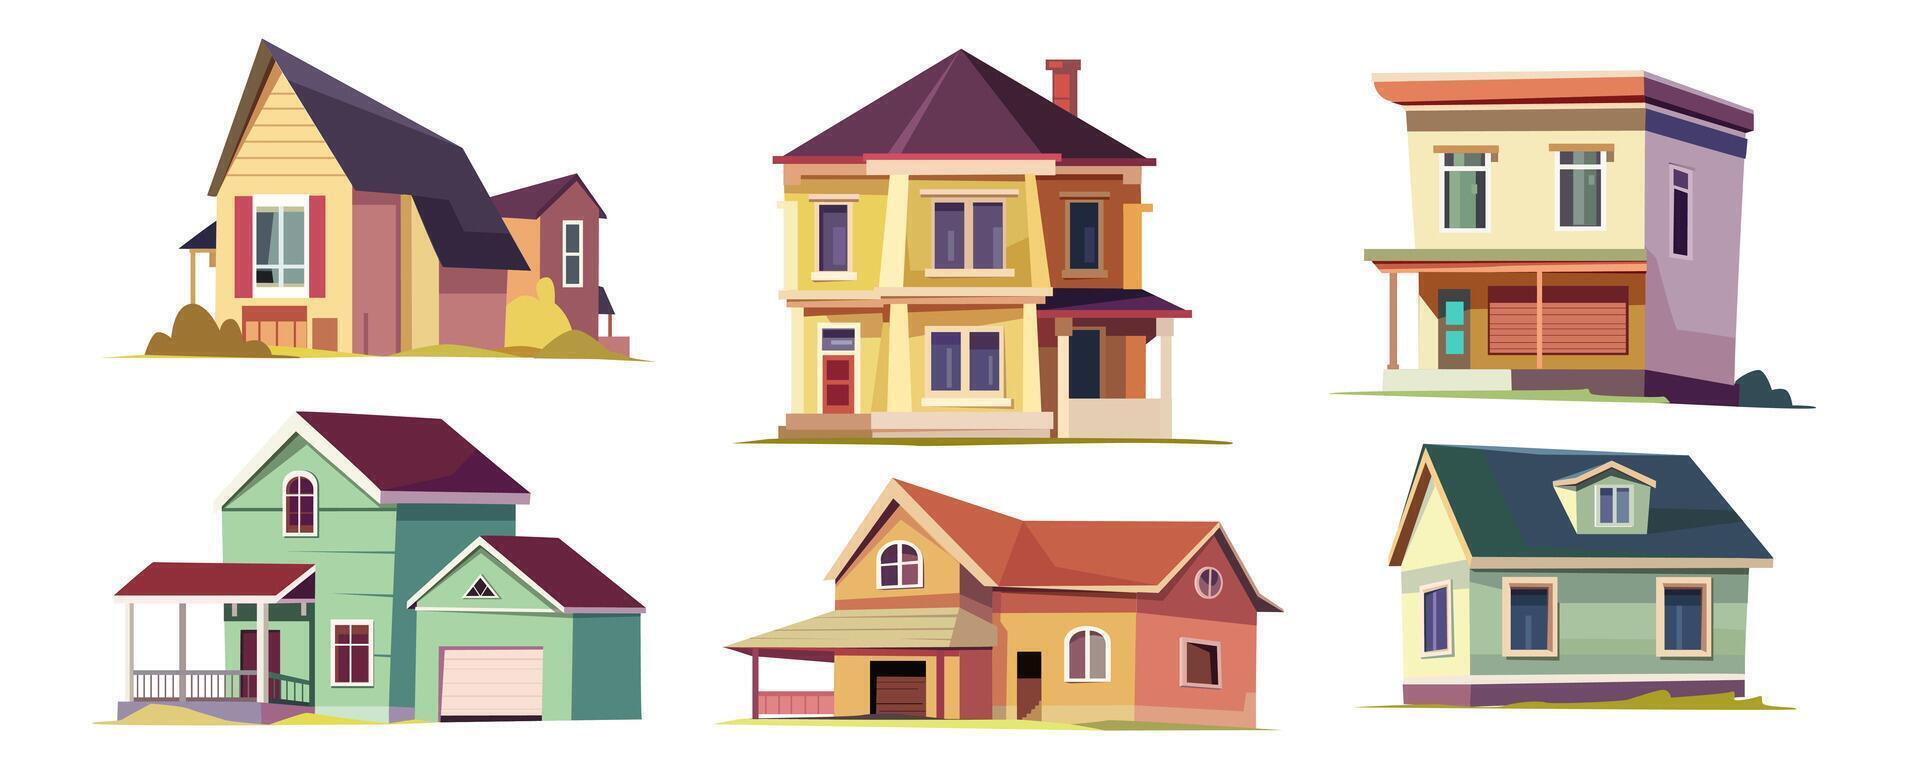 Town building mega set in cartoon graphic design. Bundle elements of different types of suburban houses, bungalow and cottages, suburb residential real estate. Vector illustration isolated objects